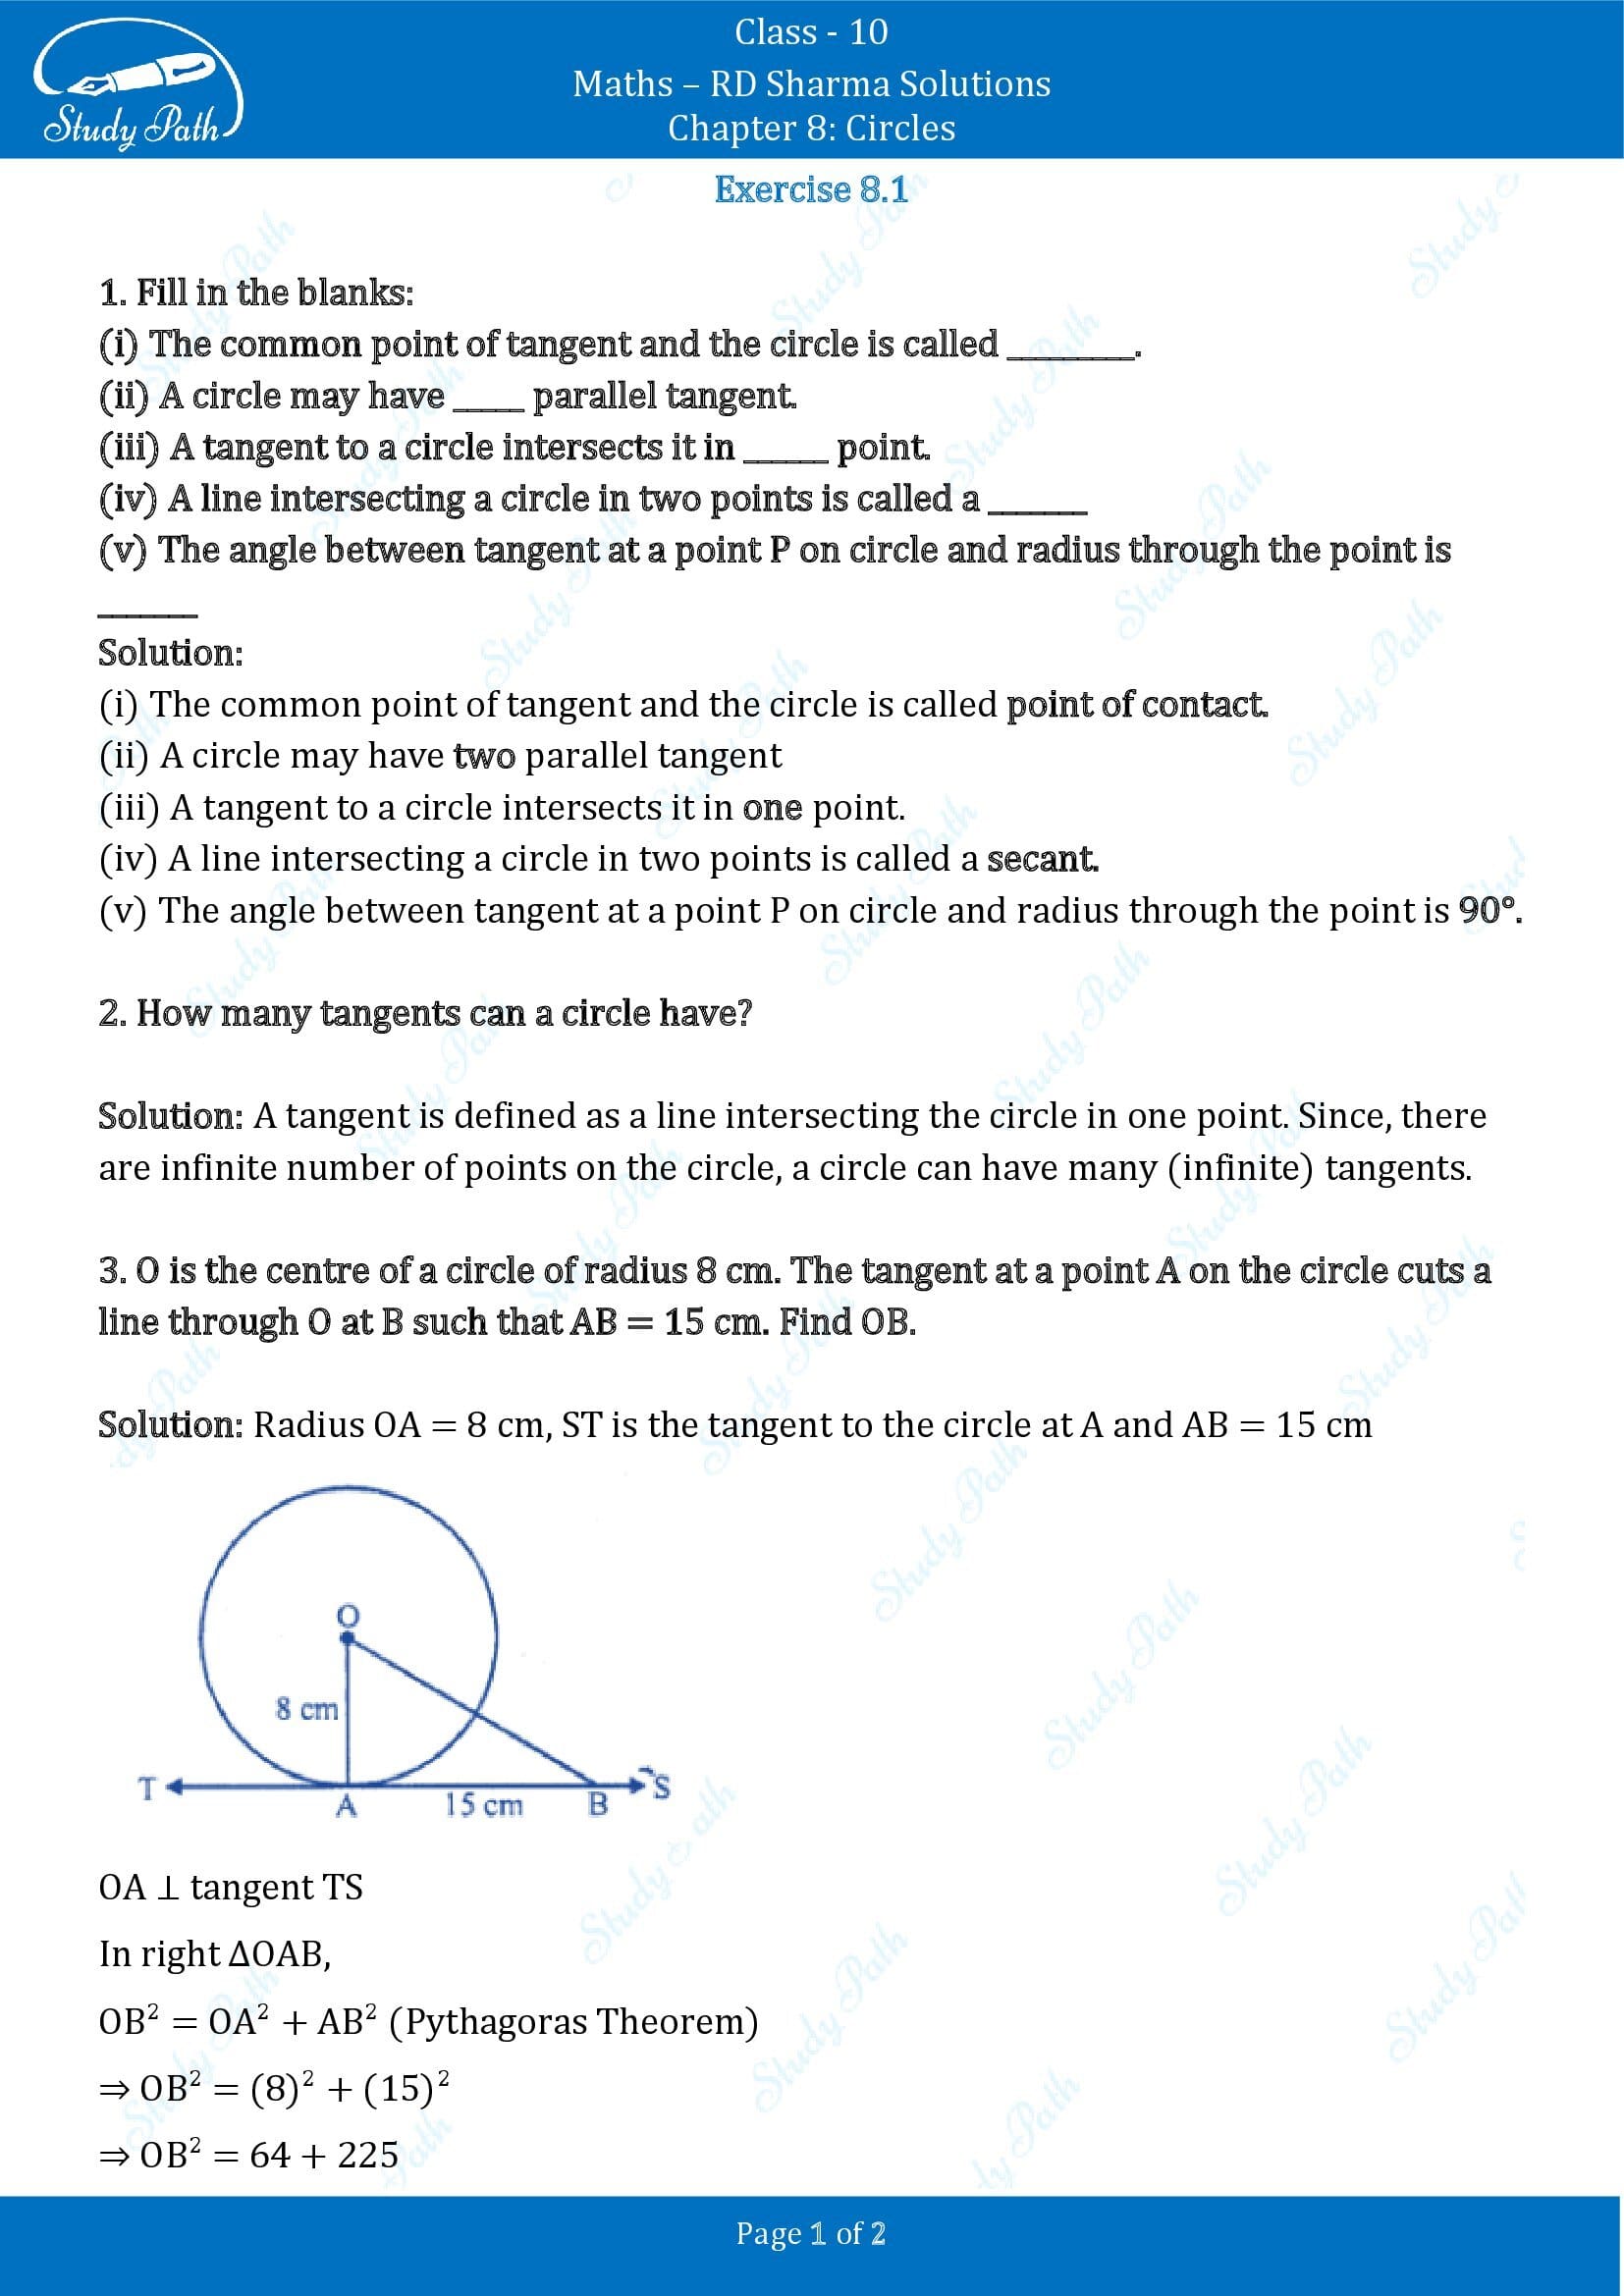 RD Sharma Solutions Class 10 Chapter 8 Circles Exercise 8.1 00001